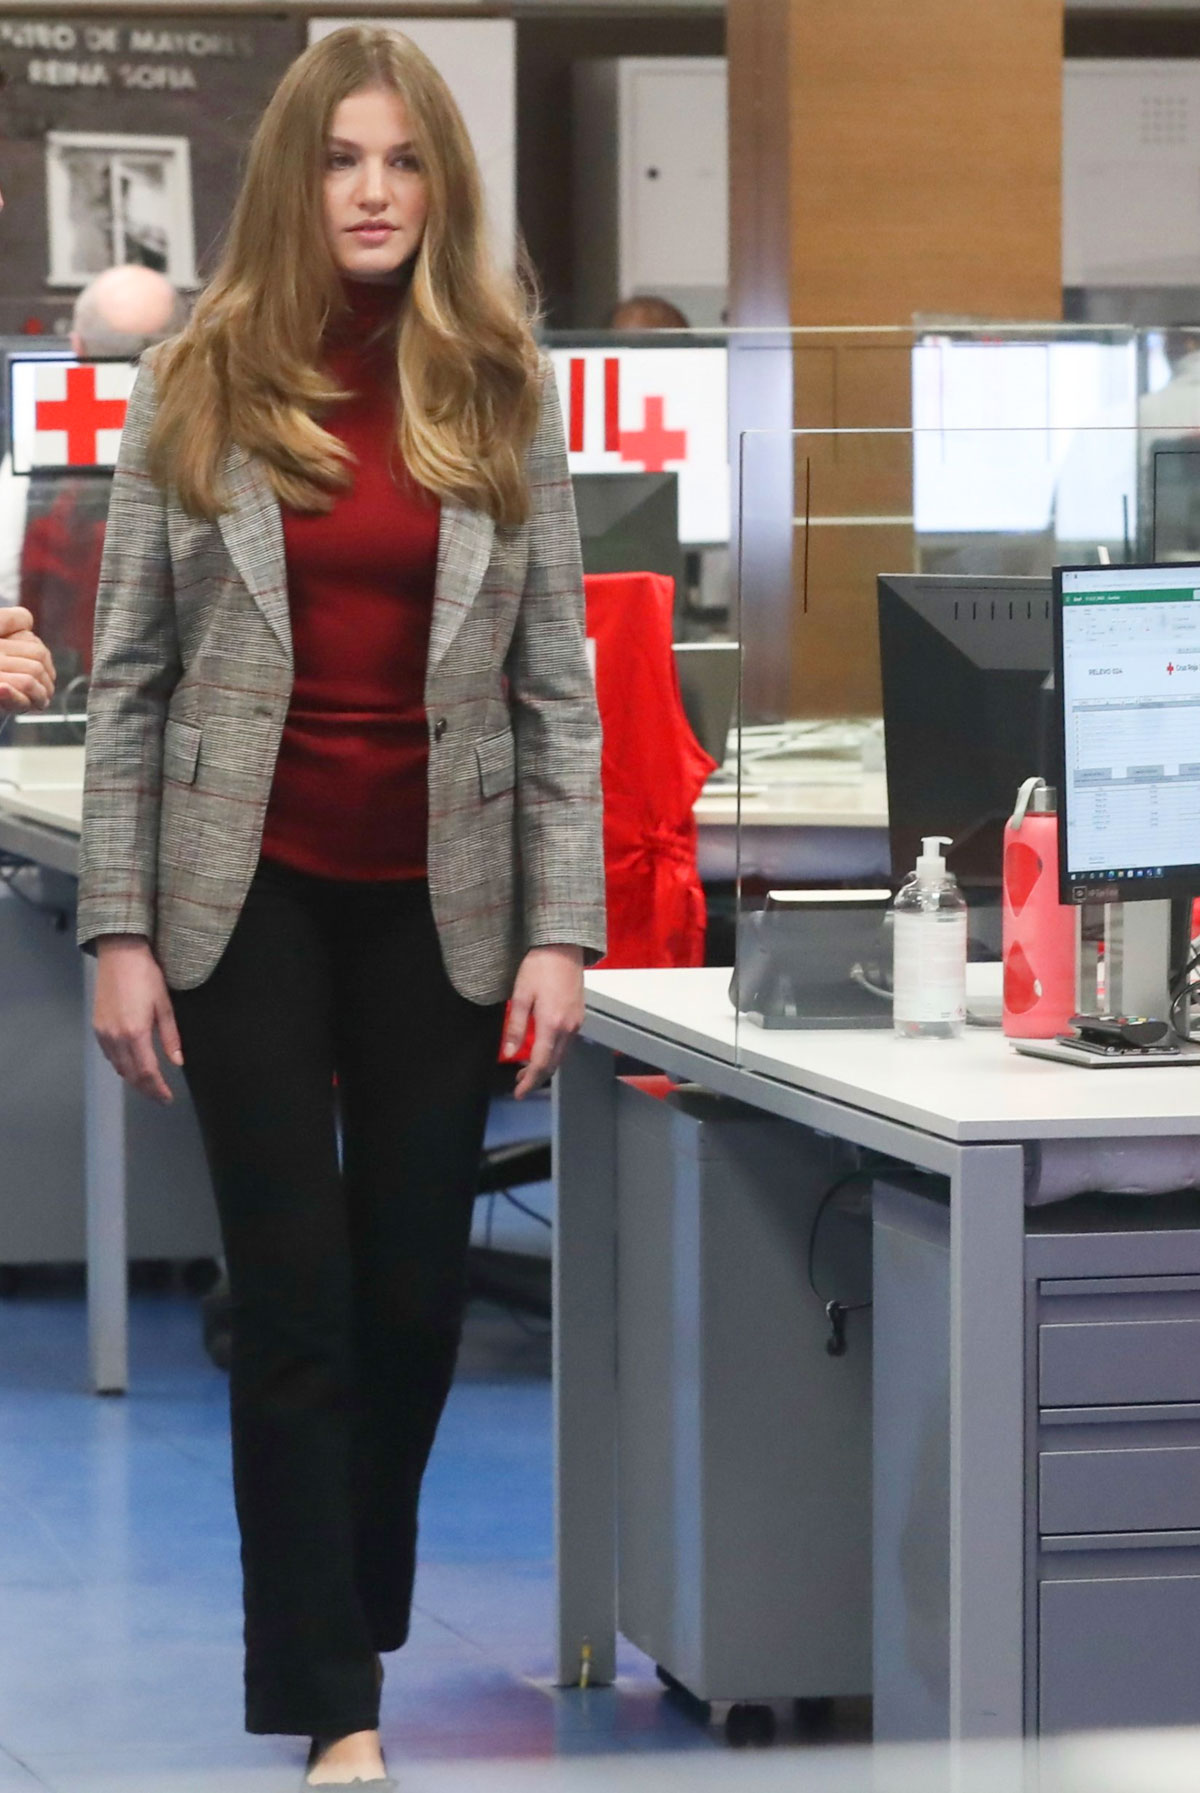 Princess Leonor at the Red Cross Operation Center